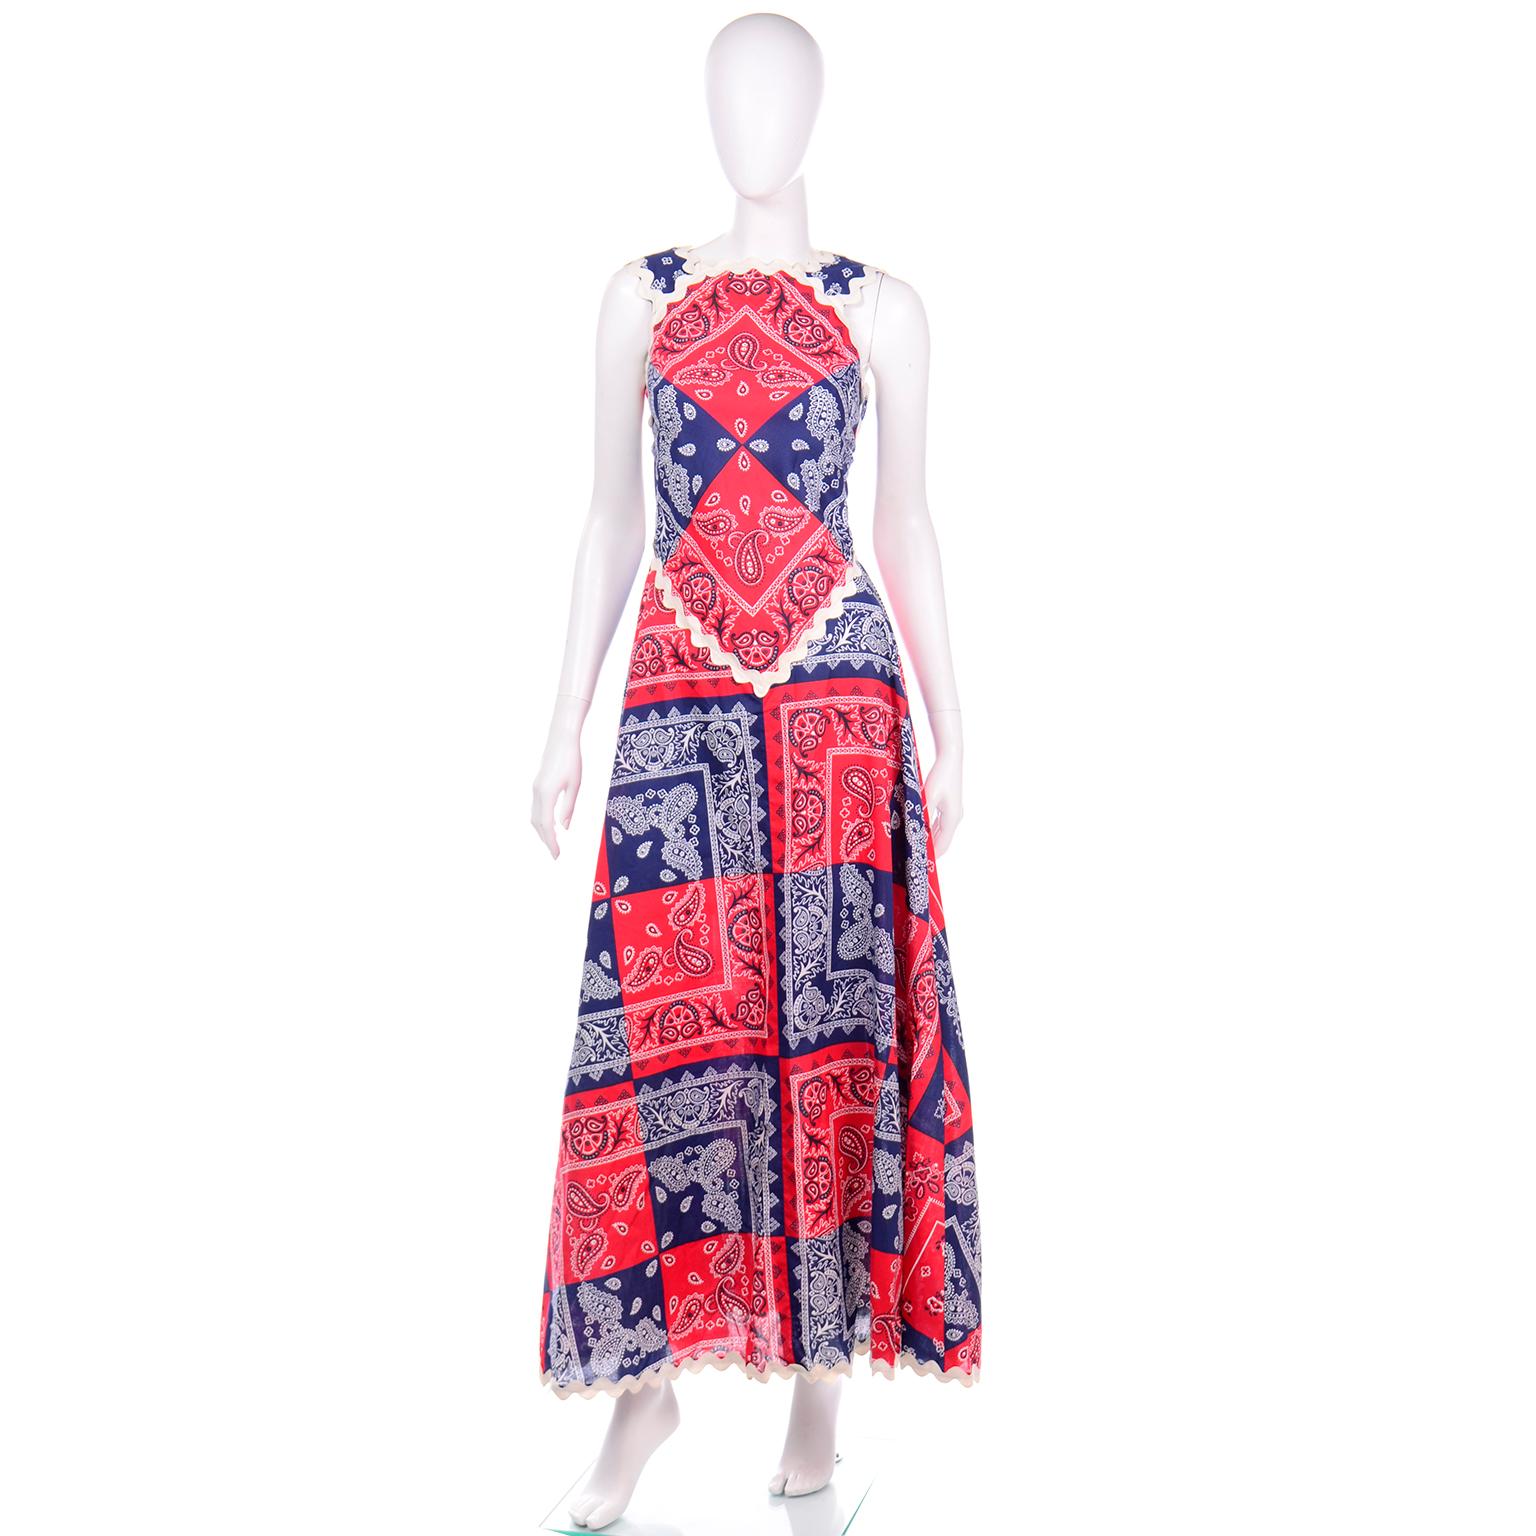 We adore this fabulous Howard Wolf deadstock early 1970's red and blue bandana patchwork print dress with ivory rick-rack trim. This dress has a high square neckline similar to an apron style dress. The straps are thick and have white rick-rack trim